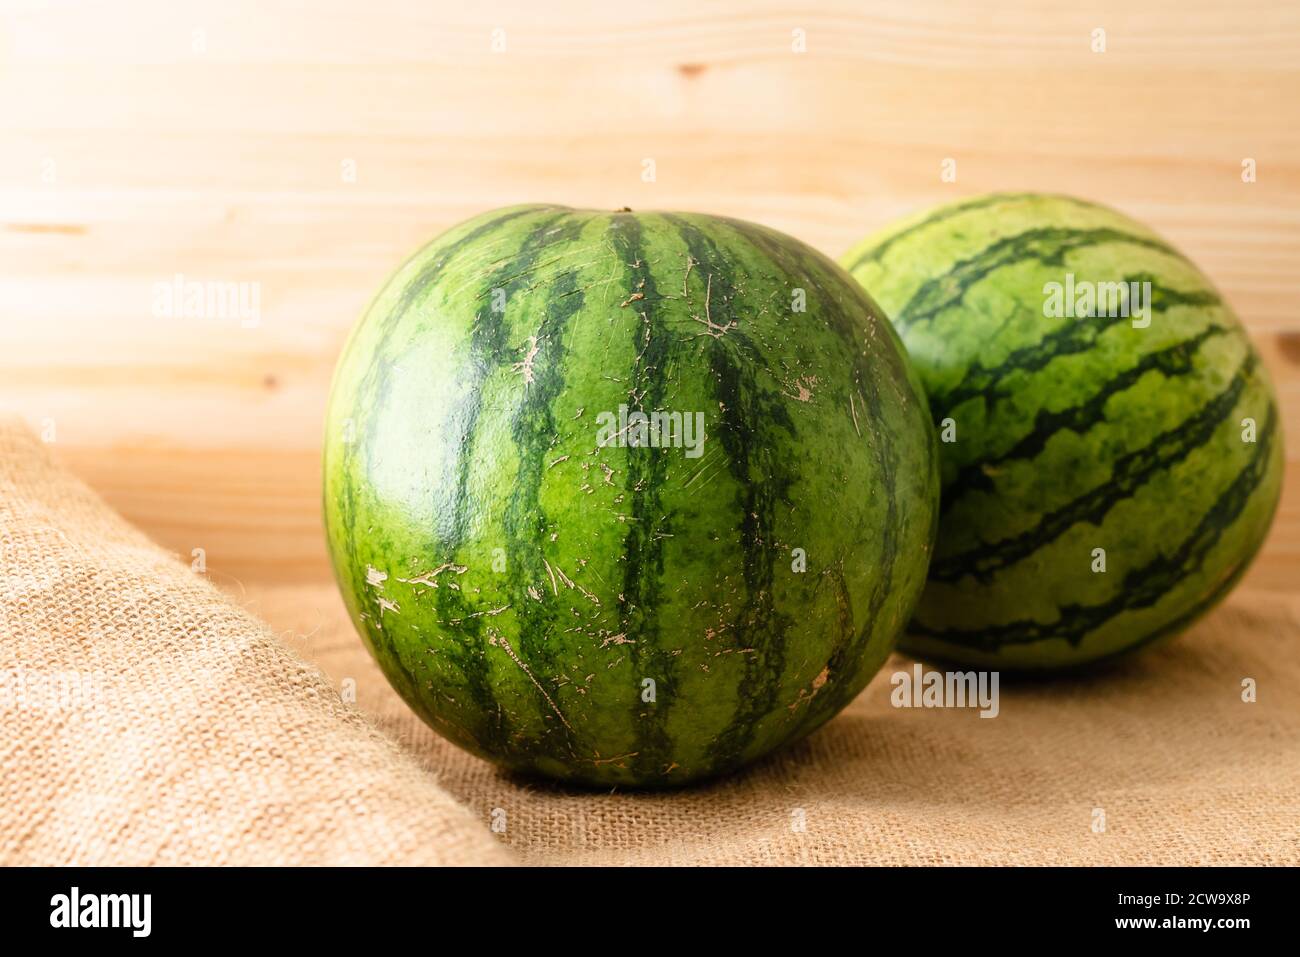 Watermelon close up. Two ripe organic watermelons on rustic wooden background Stock Photo